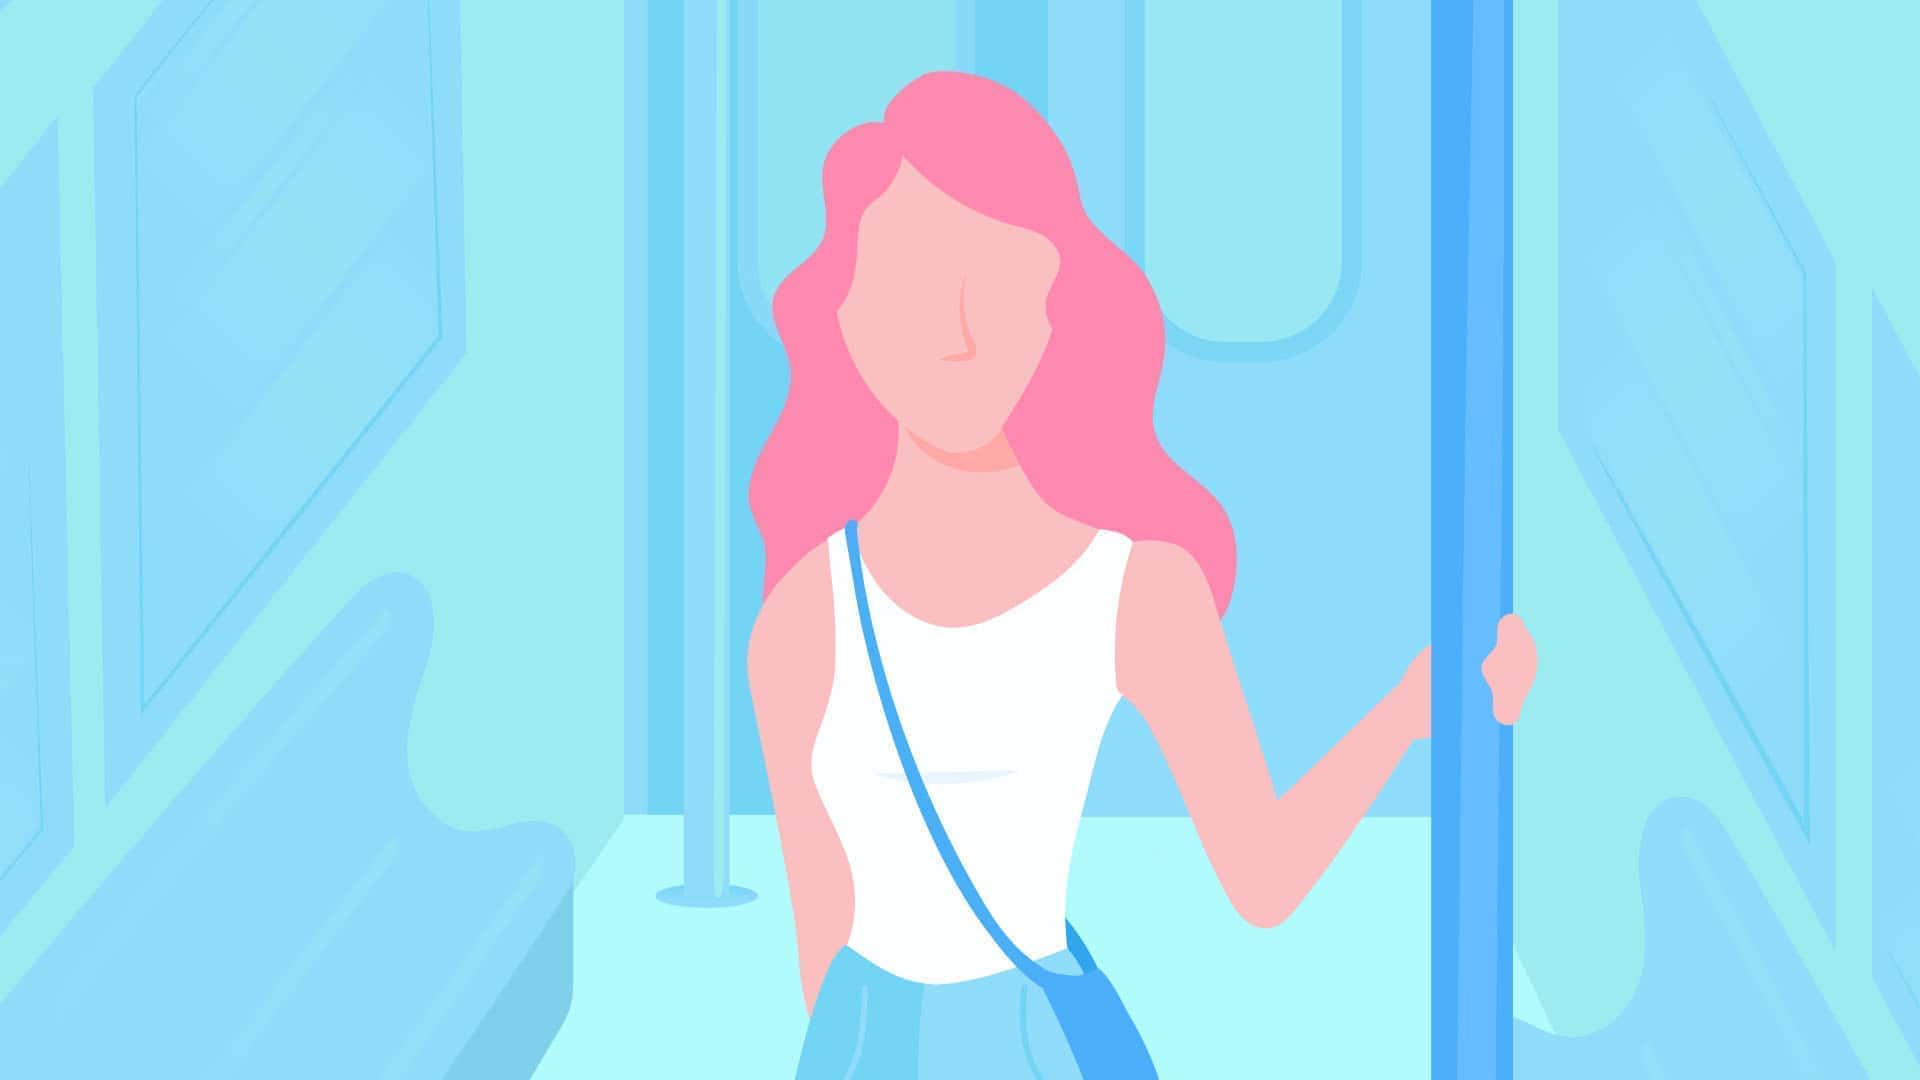 Illustration of a woman on a train